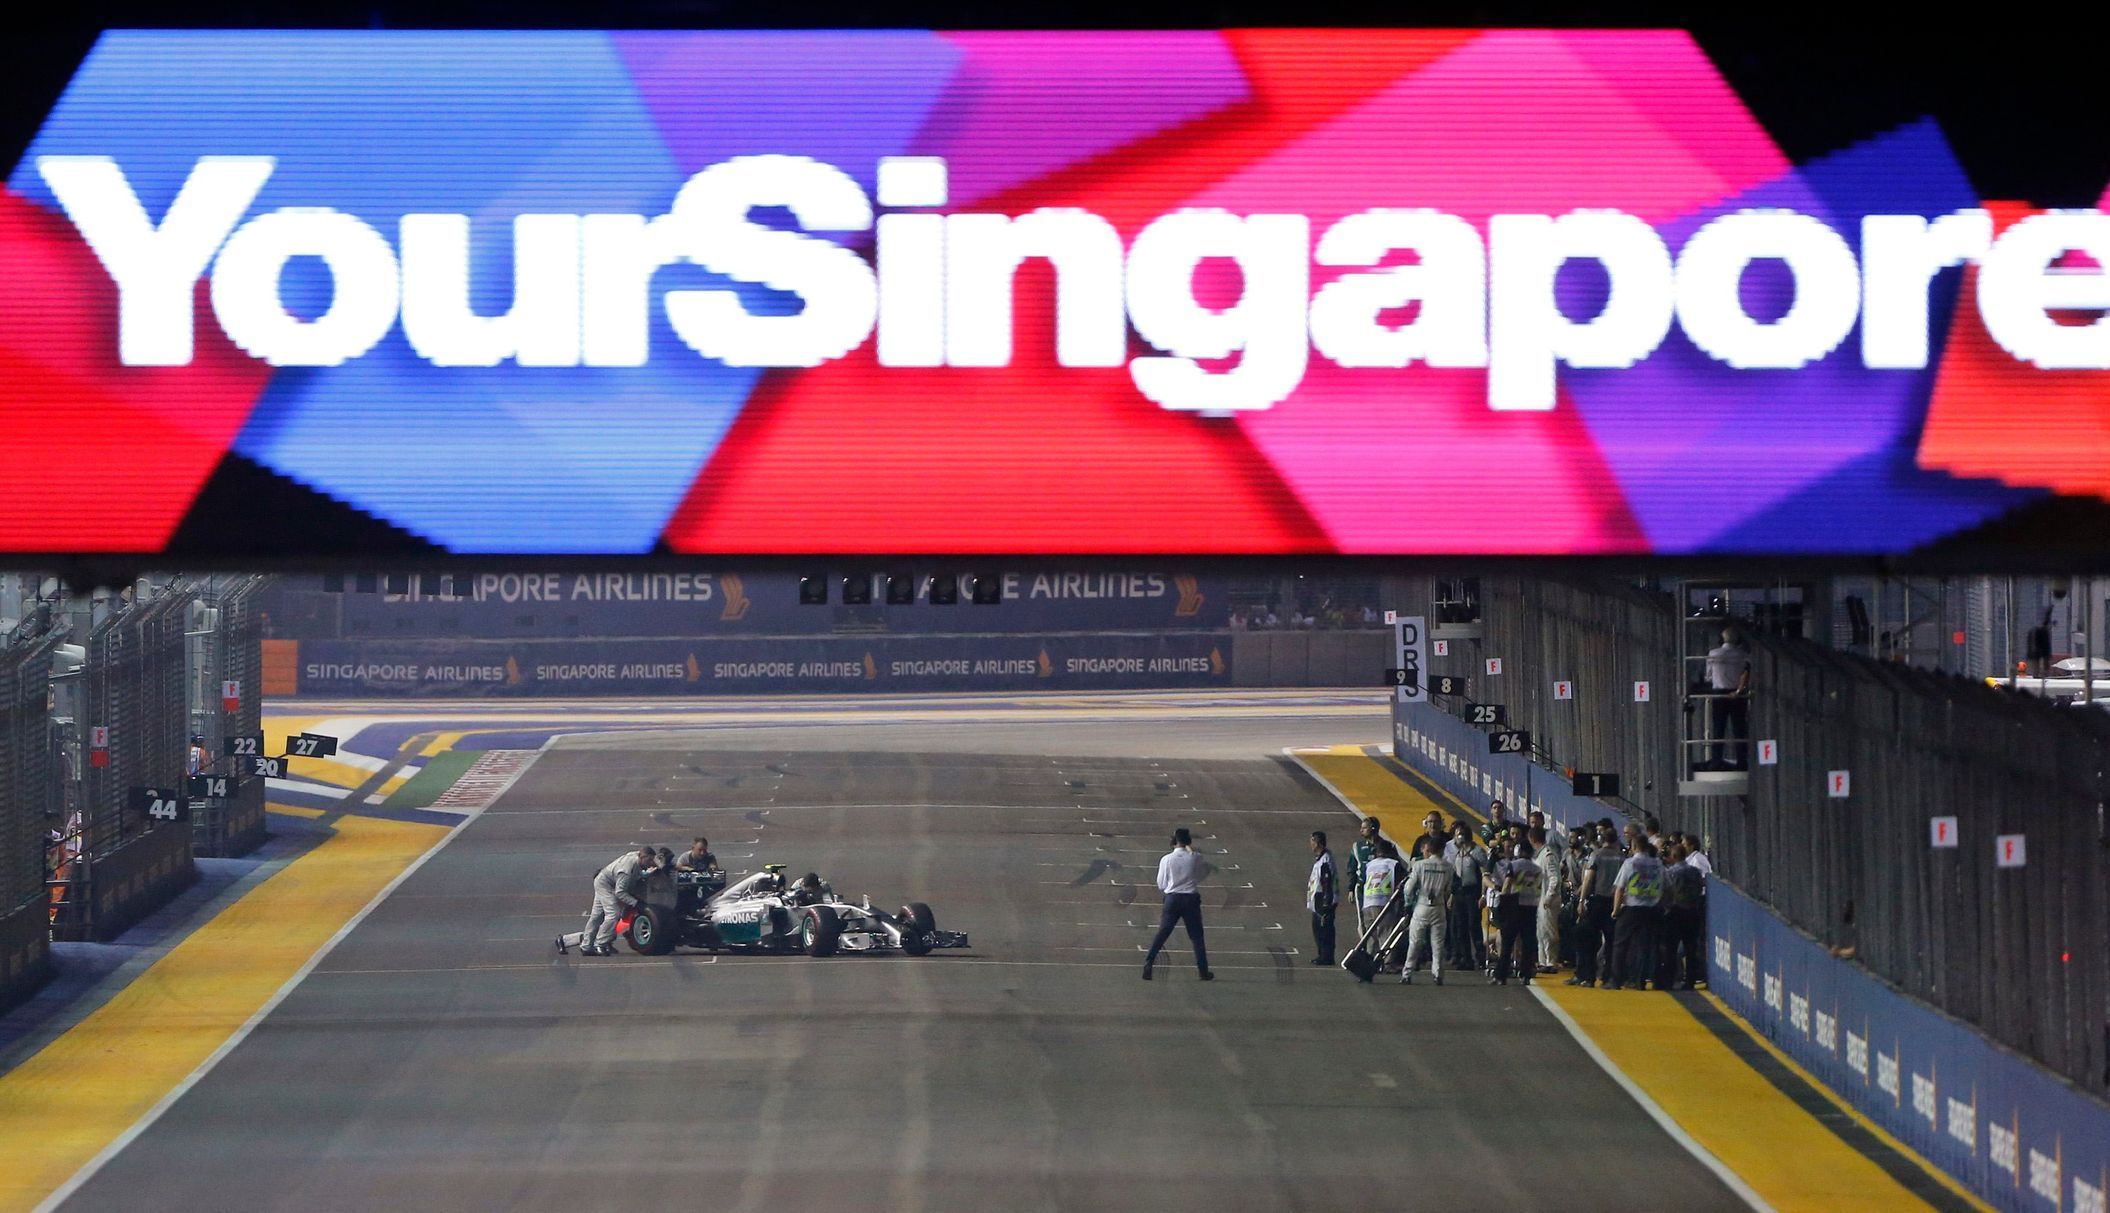 Mercedes Formula One driver Nico Rosberg of Germany has his car pushed back to the pit lane just before the start of the Singapore F1 Grand Prix at the Marina Bay street circuit in Singapore